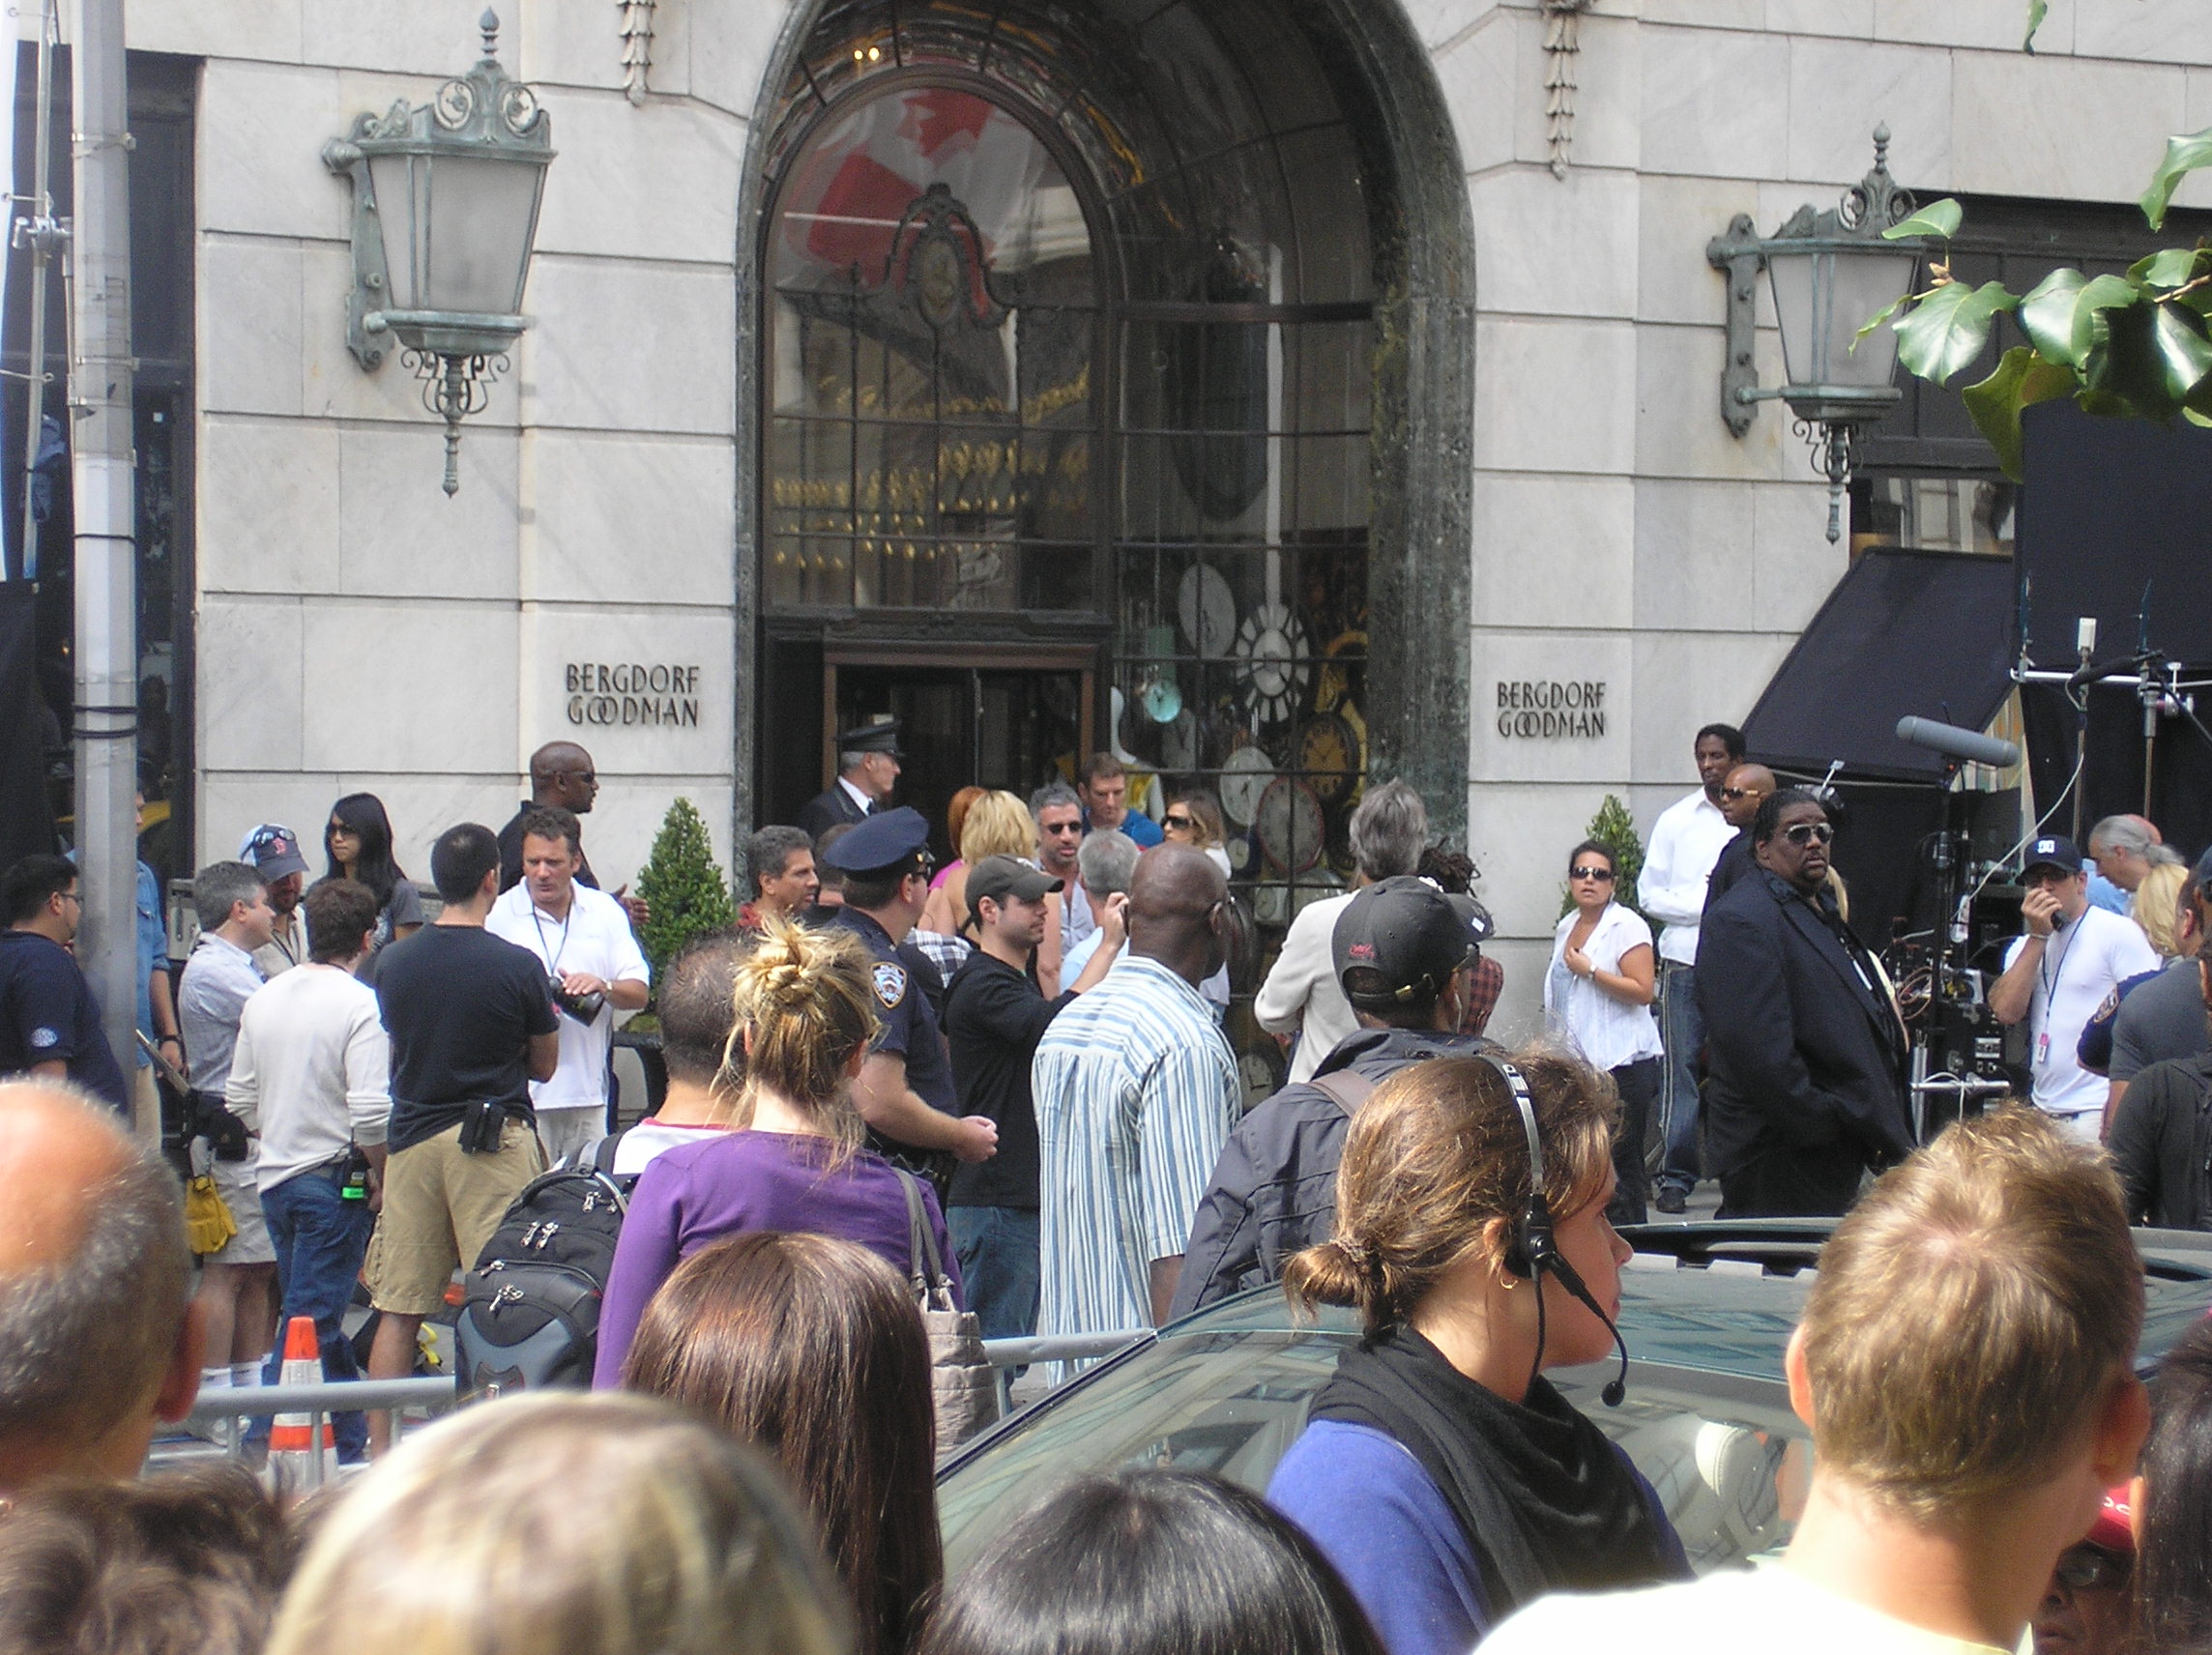 Sex and the City 2- on set shooting opening scene outside Bergdorf Goodman with huge crowds watching us.